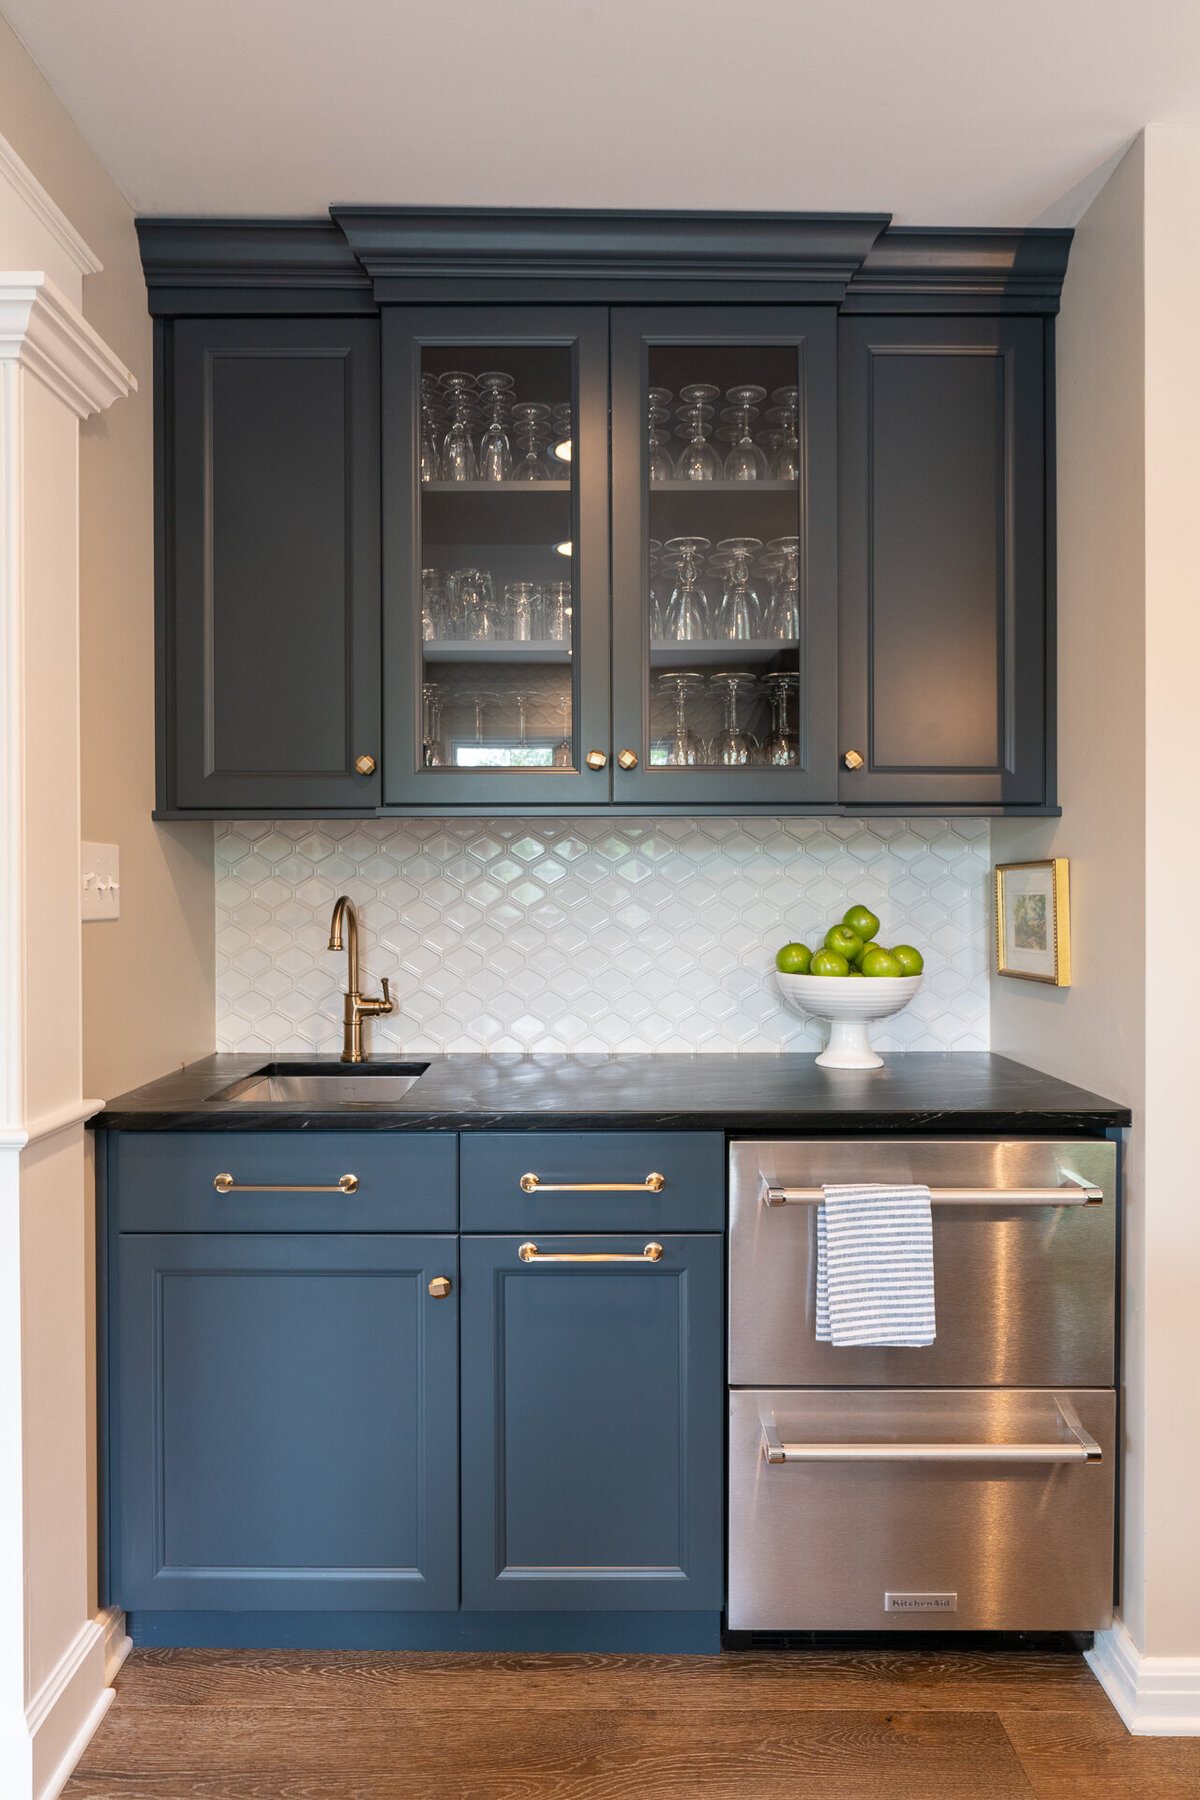 kitchenette with blue cabinets and stainless steel appliances